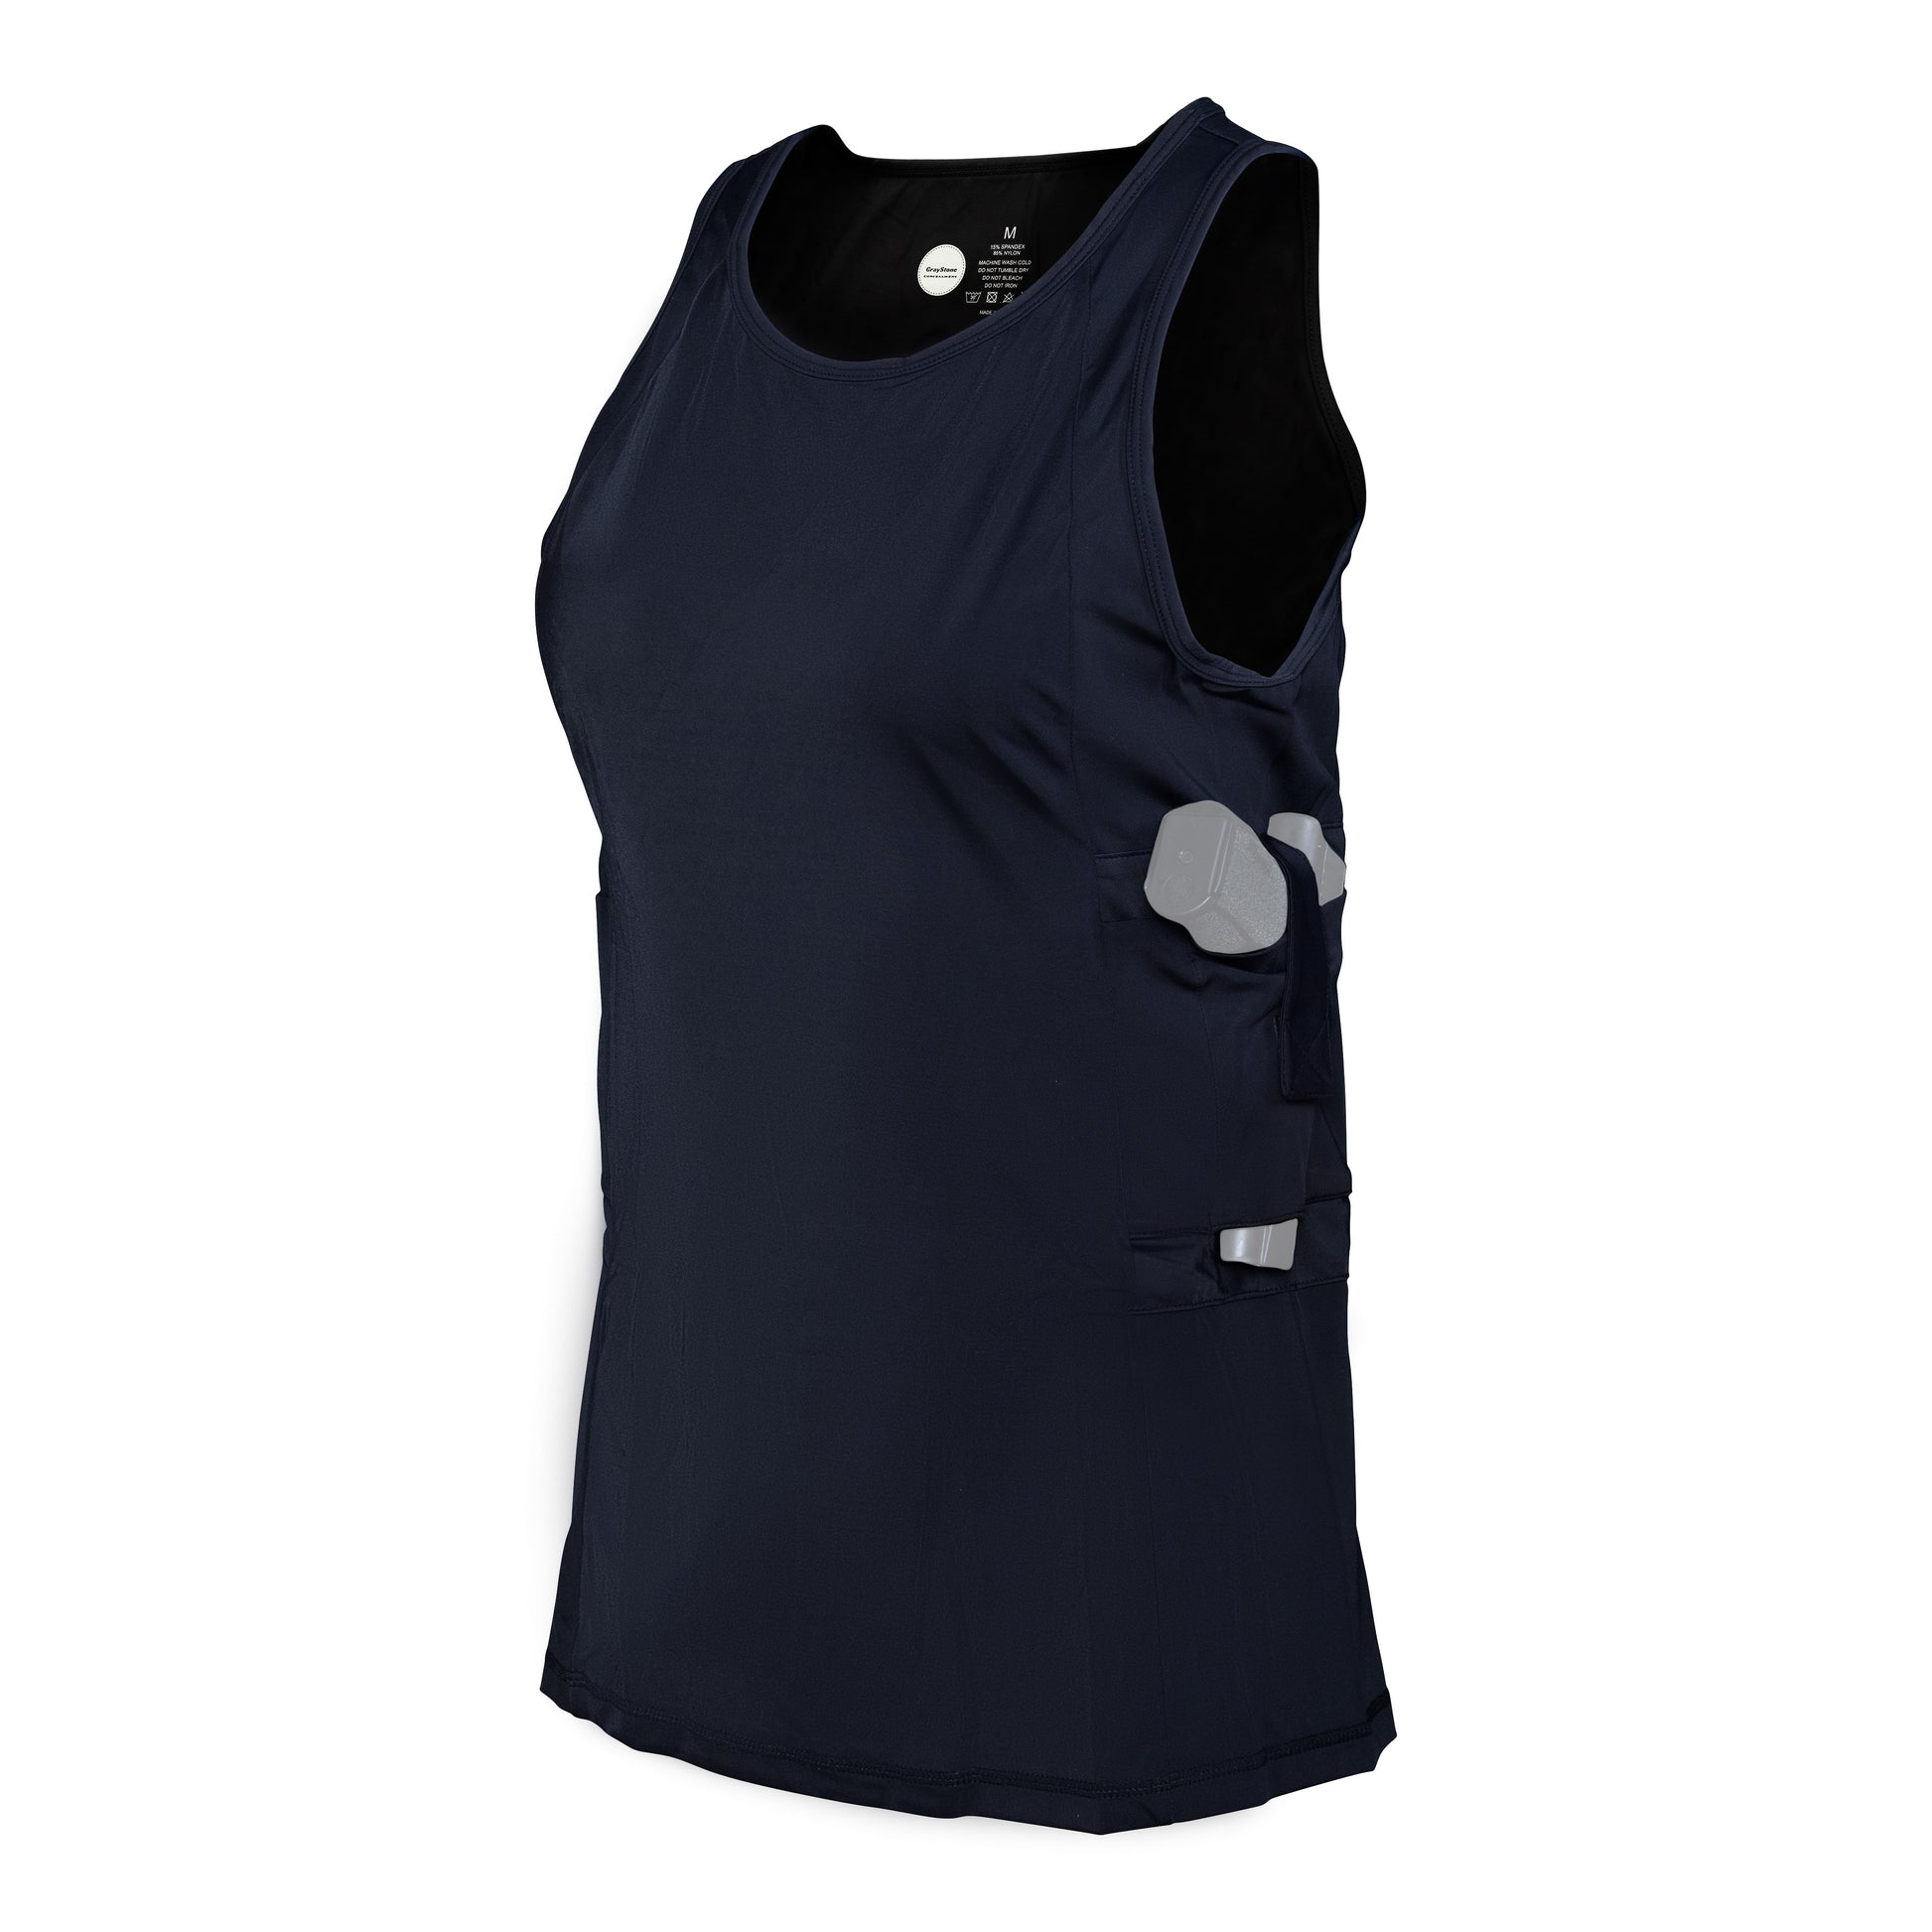 Graystone Holster Tank Top Shirt Concealed Carry Clothing For